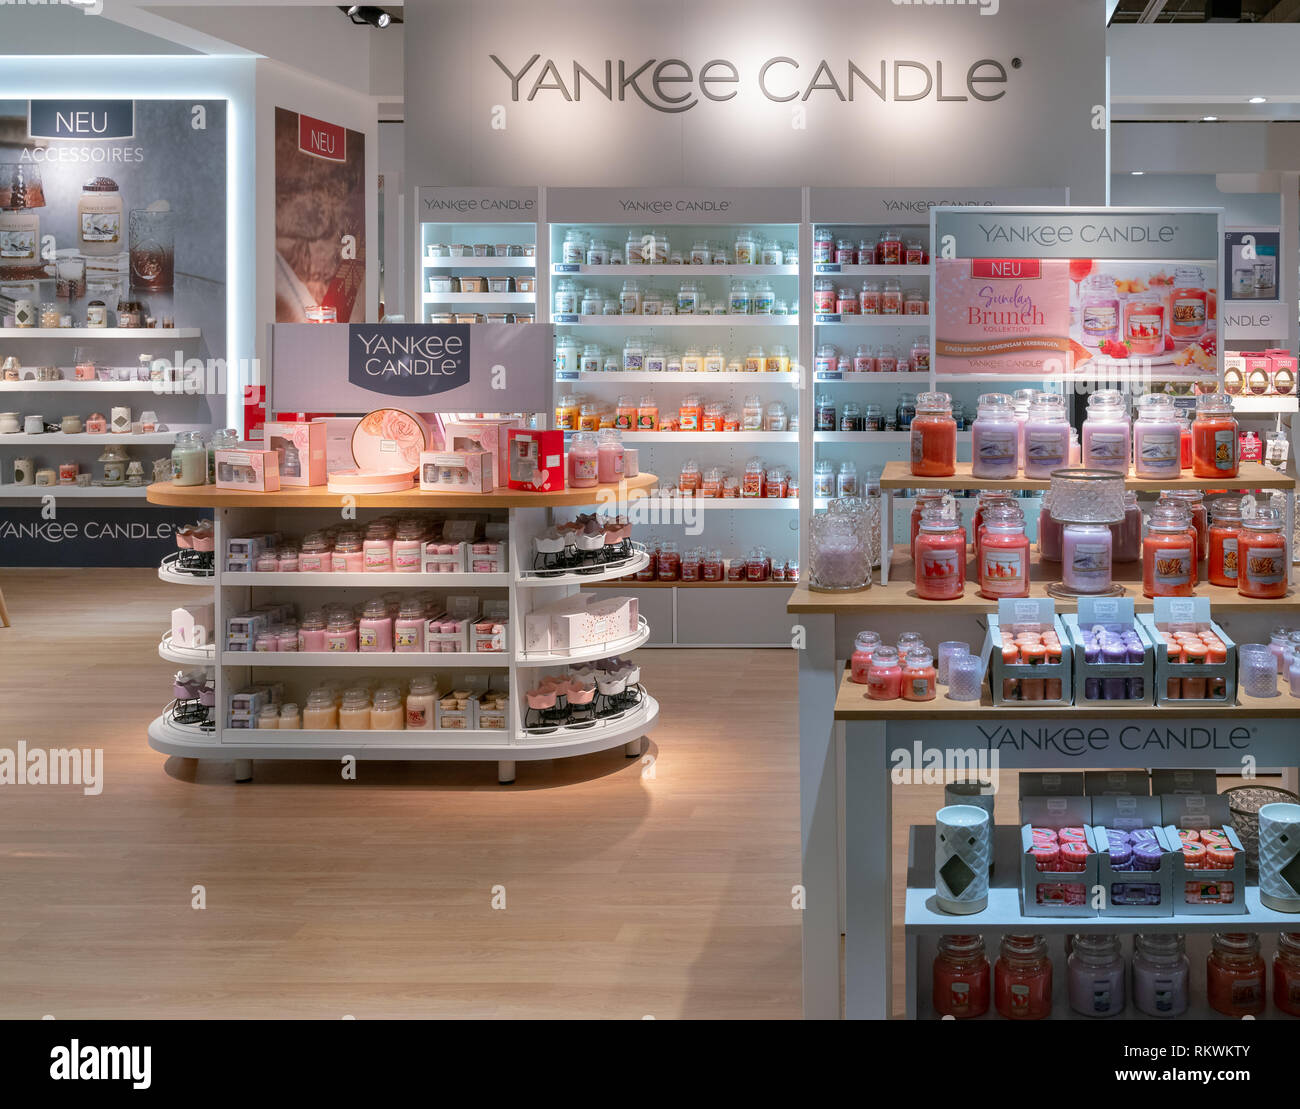 Frankfurt, Germany. 11th Feb, 2019. Impressions from the Ambiente trade  fair 2019: Assortment of Yankee Candle products. Ambiente is a leading  consumer goods trade fair with more than 4300 exhibitors and 130,000